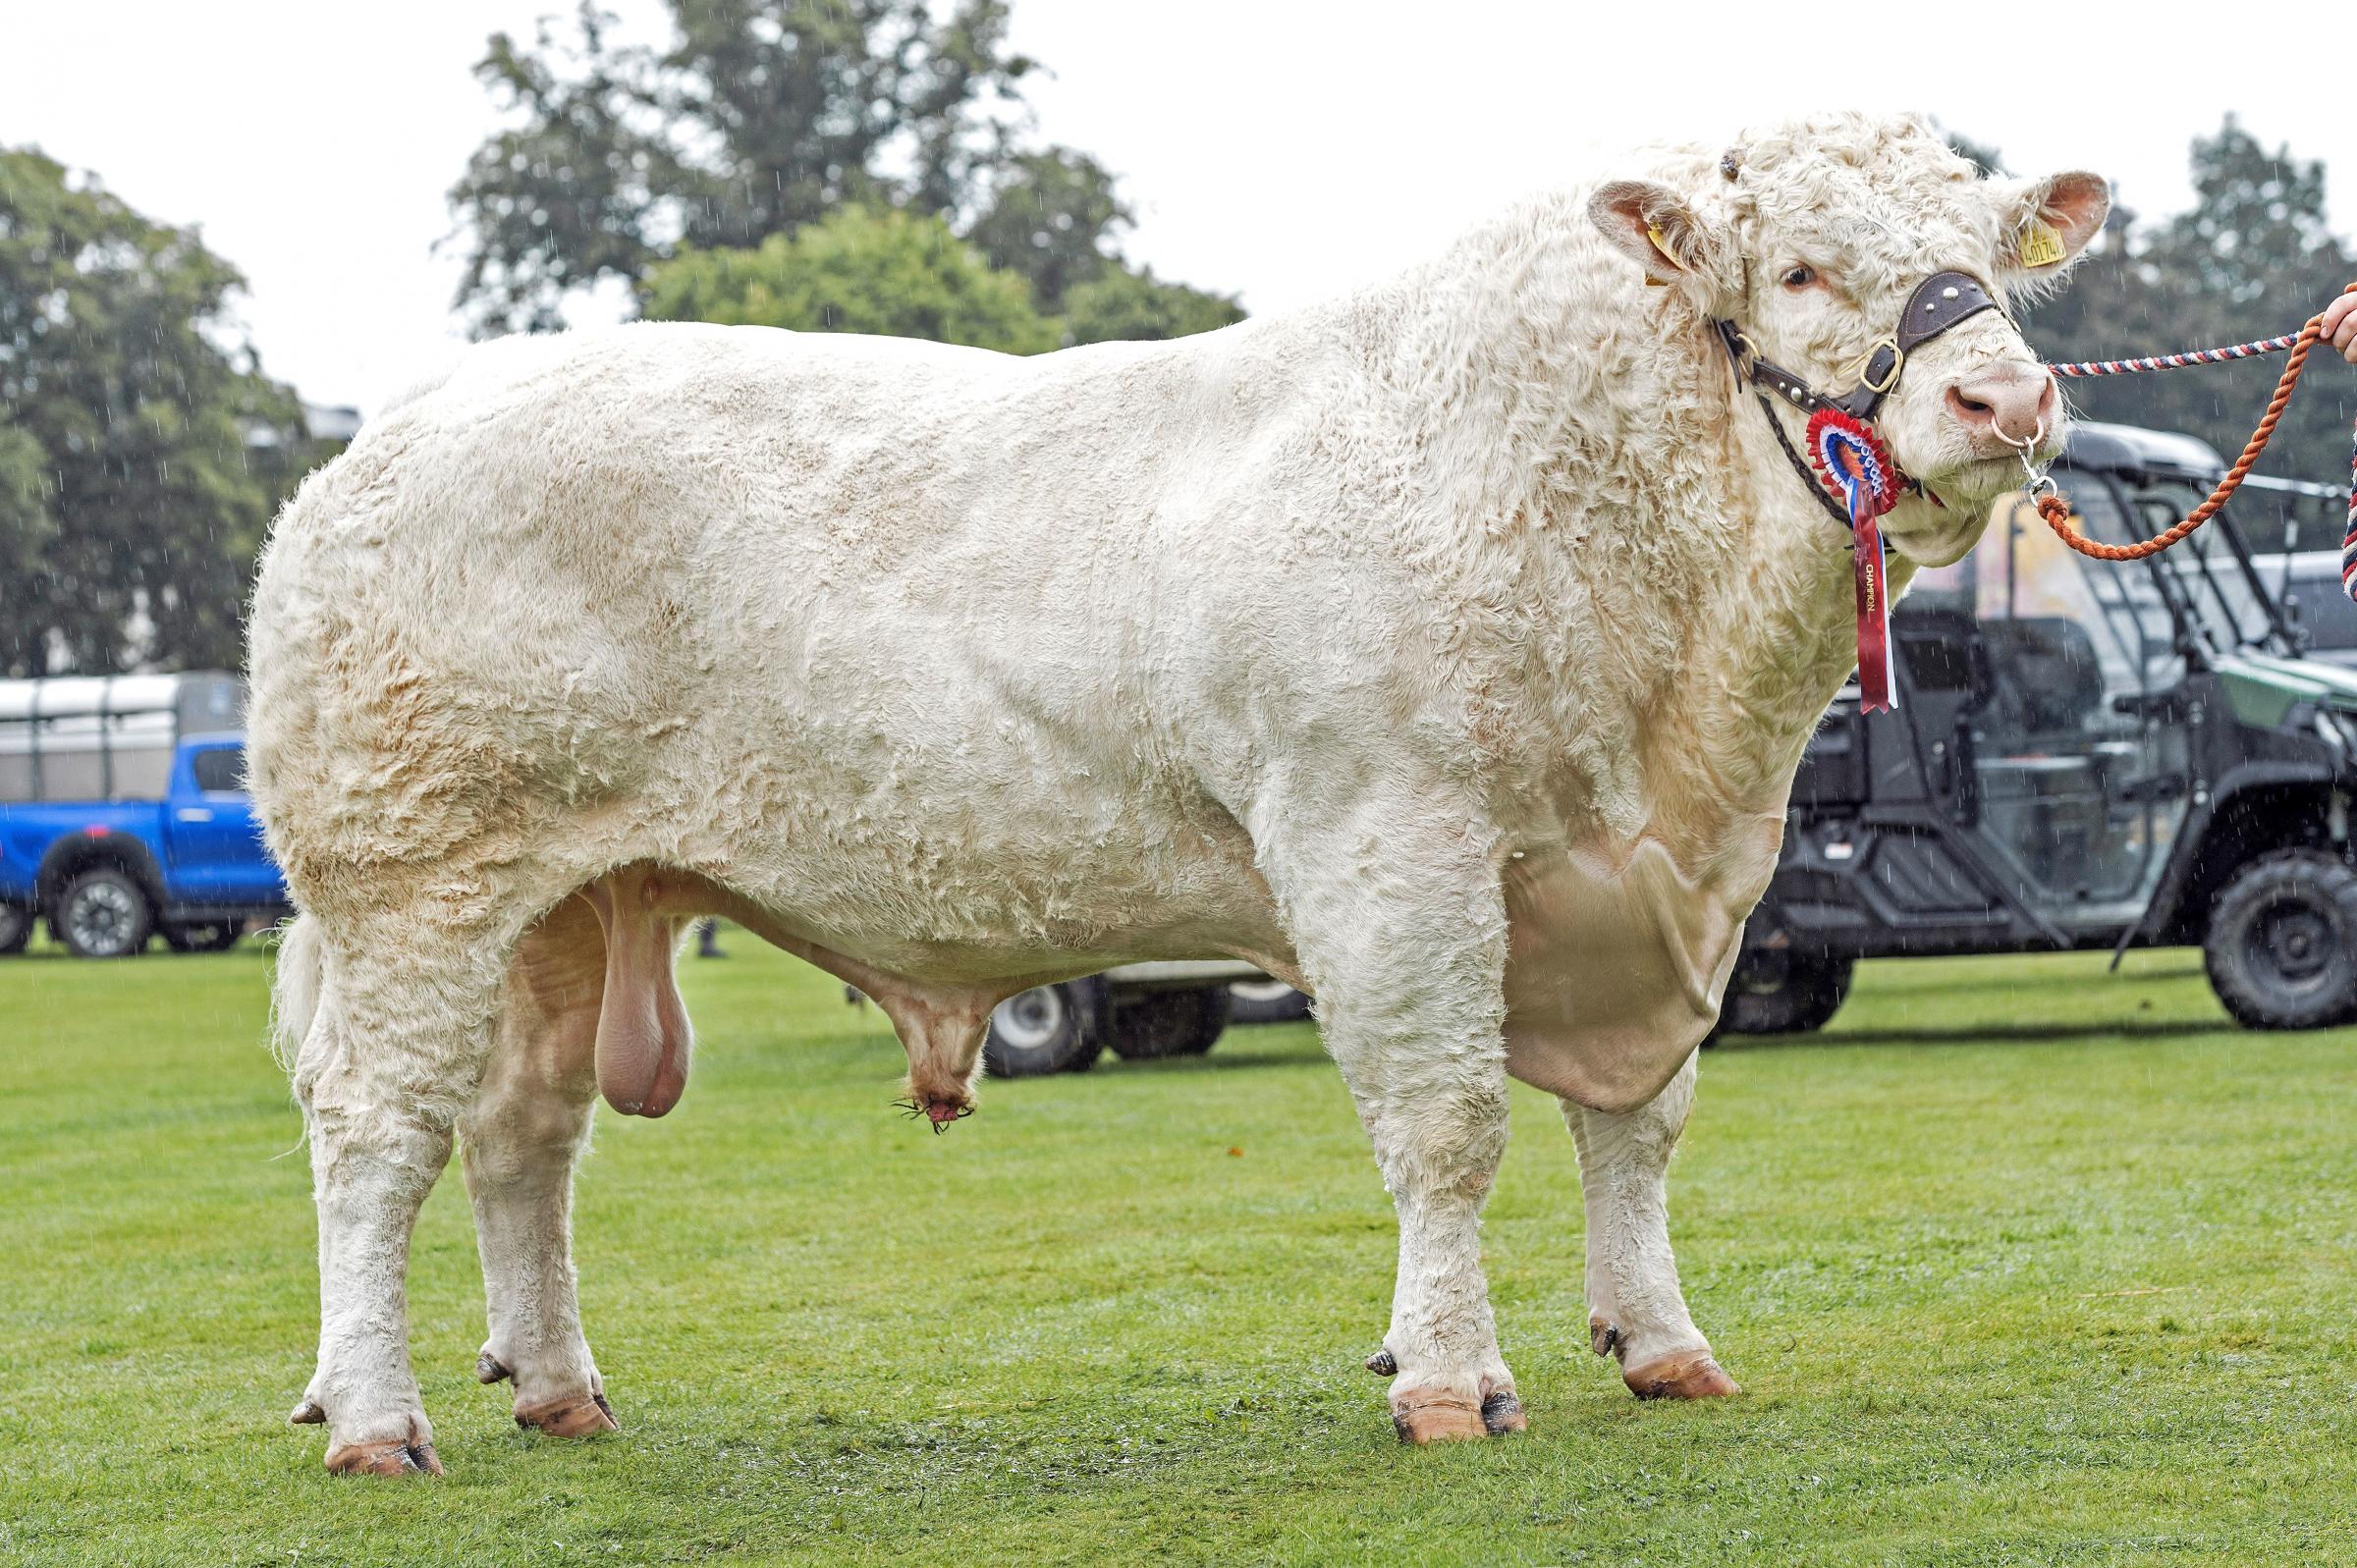 Tonely Ranald was the Charolais champion for Brailes Livestock